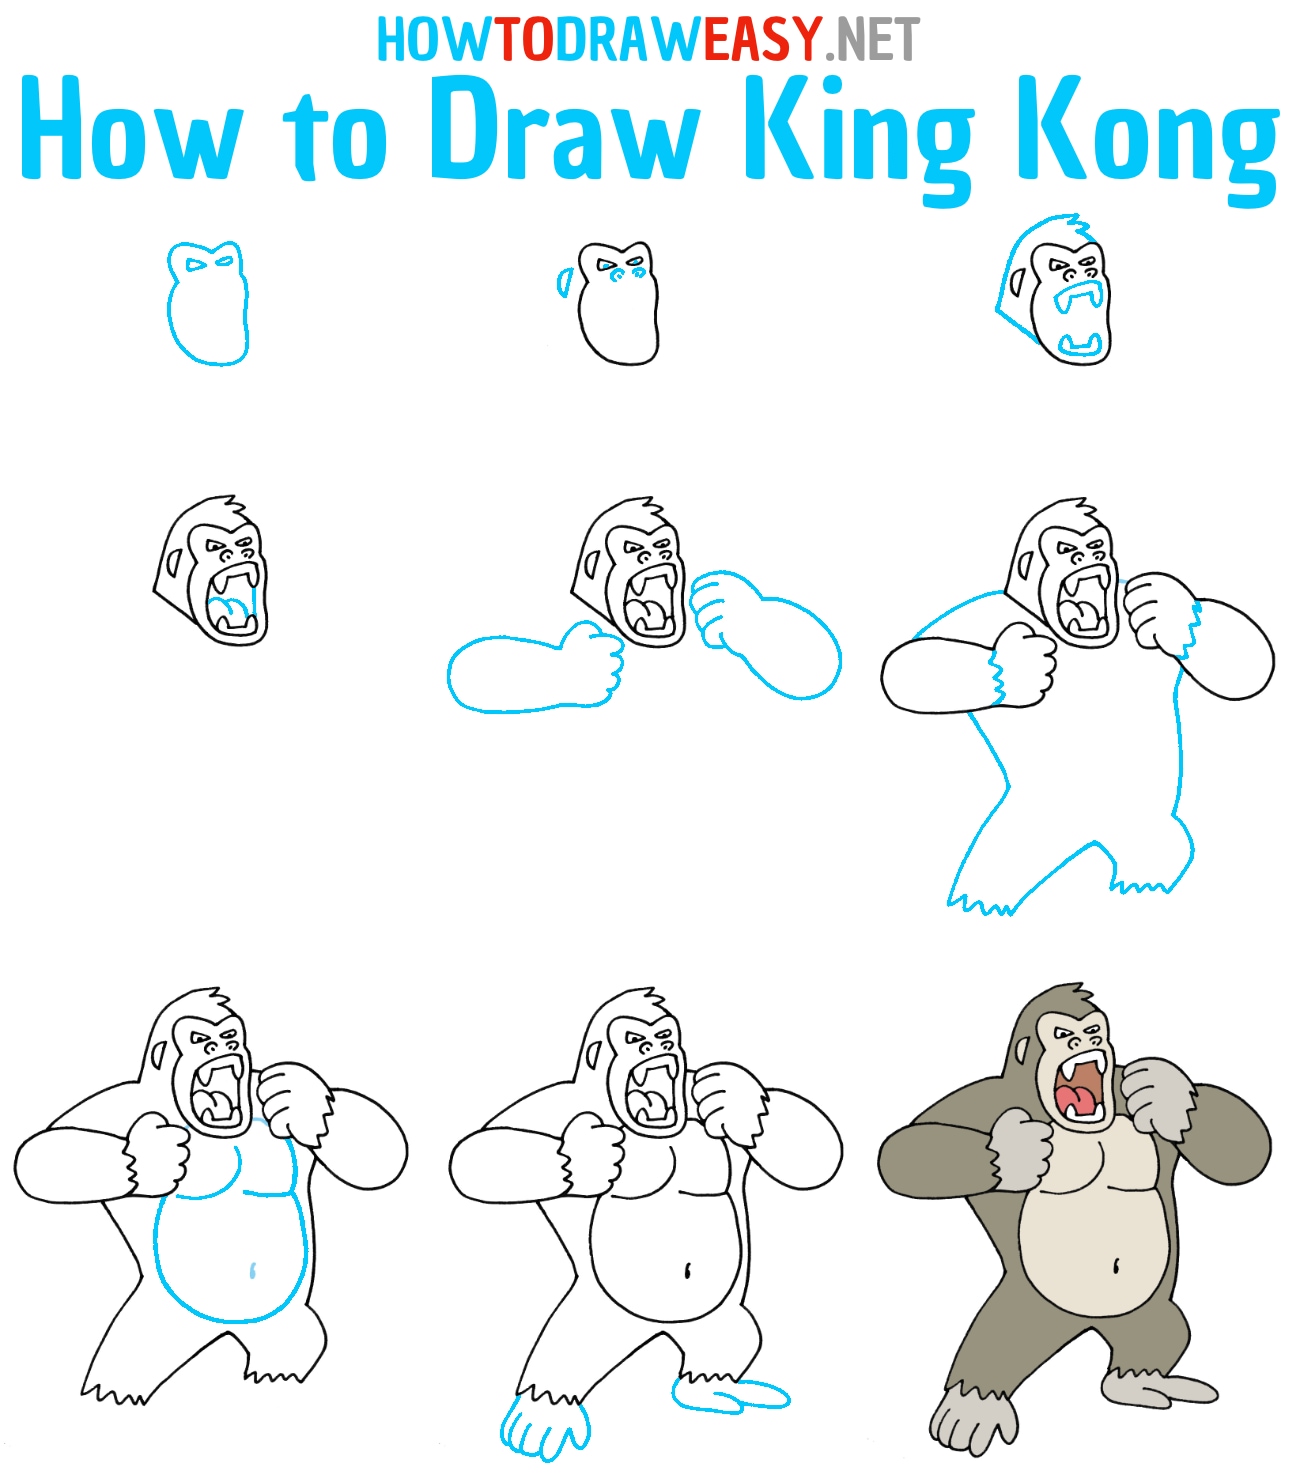 How to Draw King Kong Step by Step